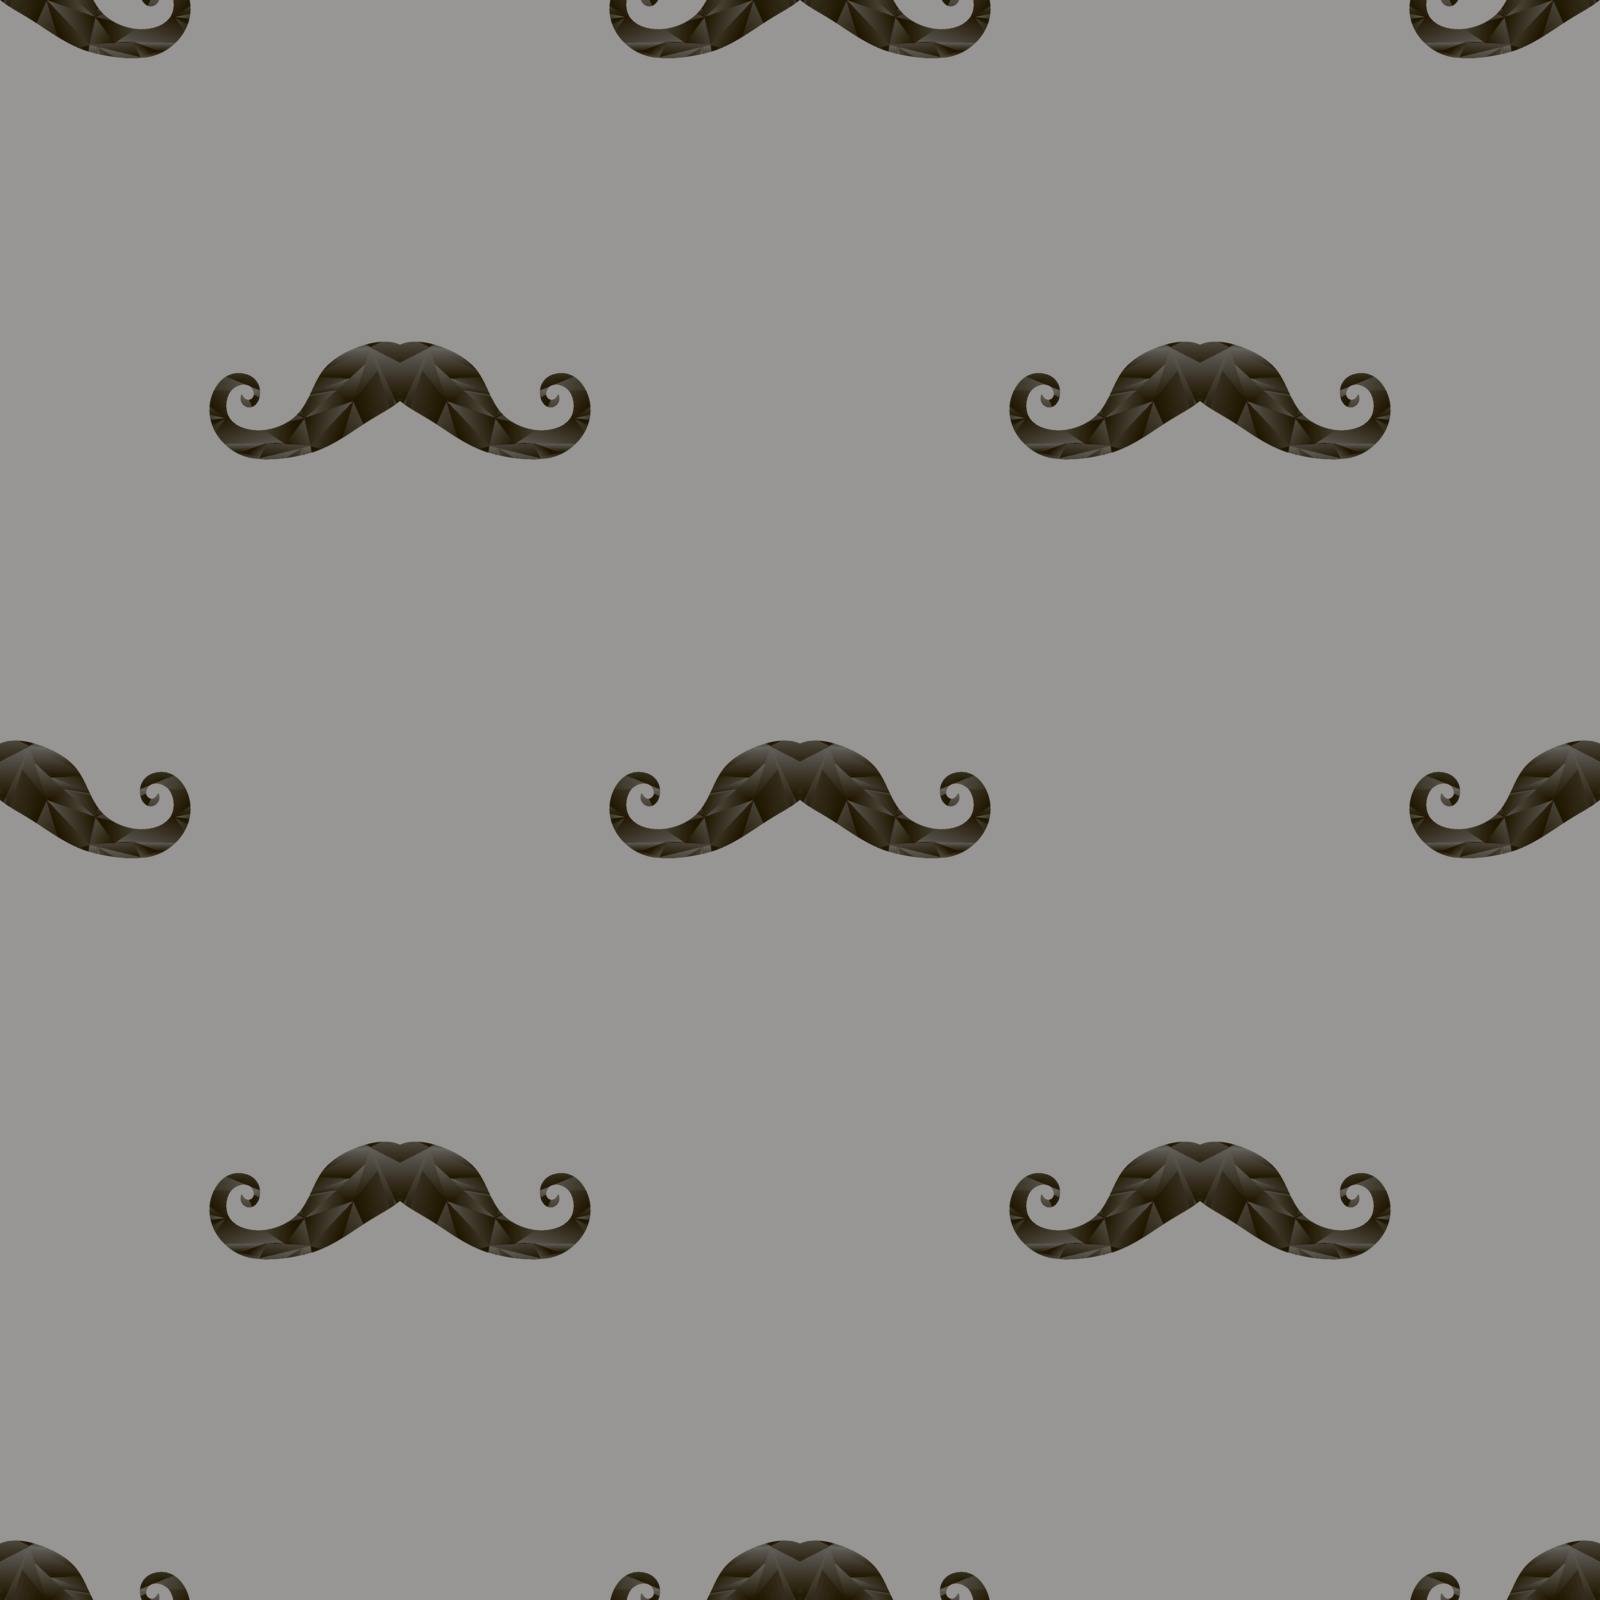 Black Hairy Mustache Silhouettes Seamless Pattern by valeo5